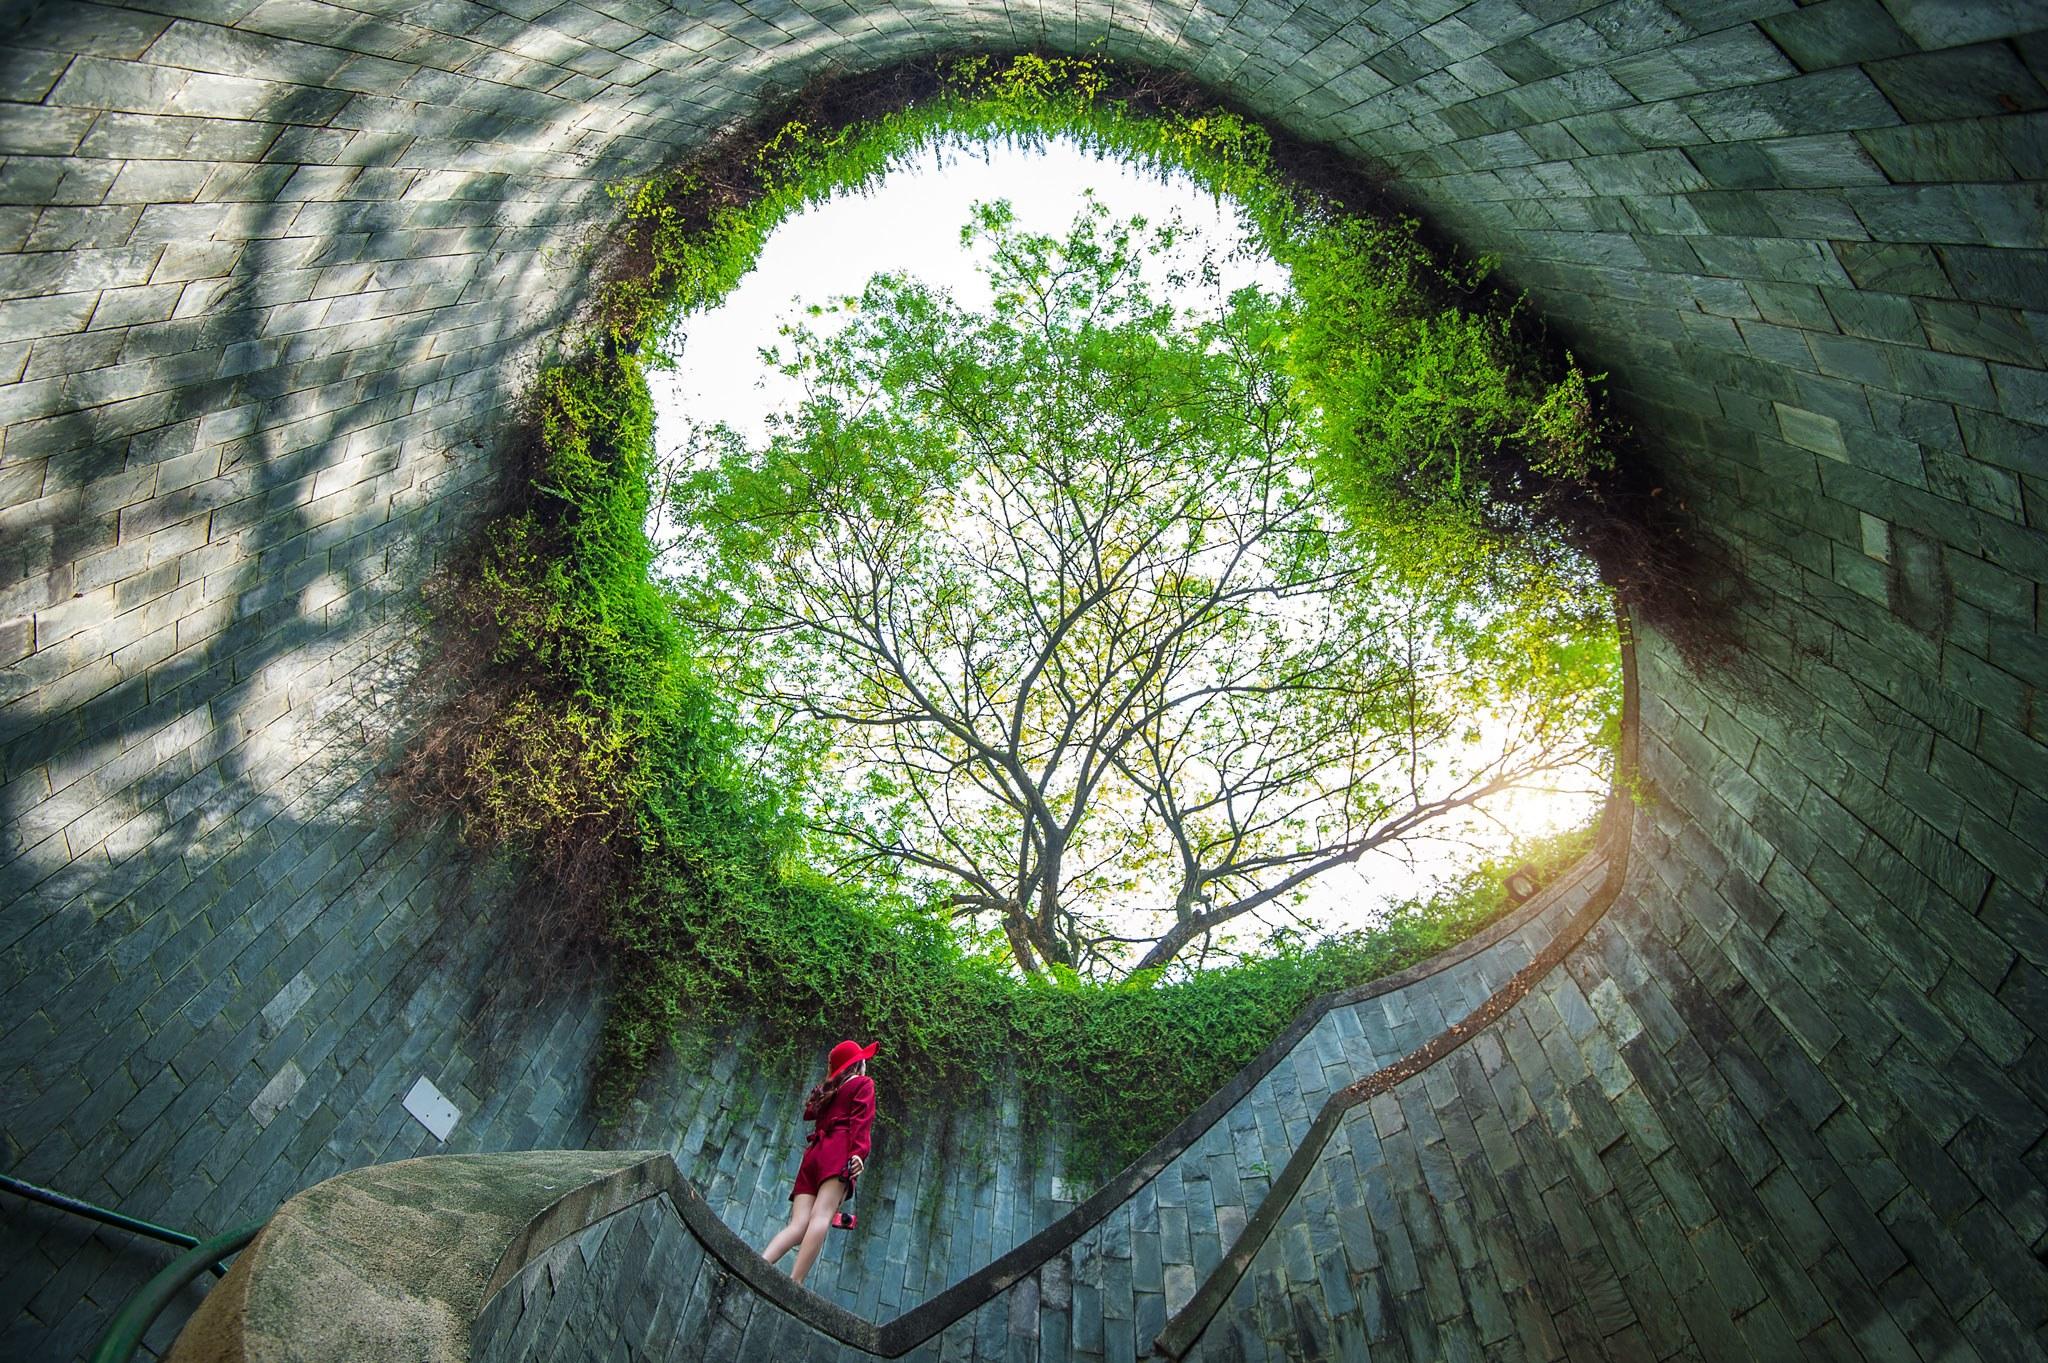 Cover image of this place Fort Canning Tree Tunnel Singapore